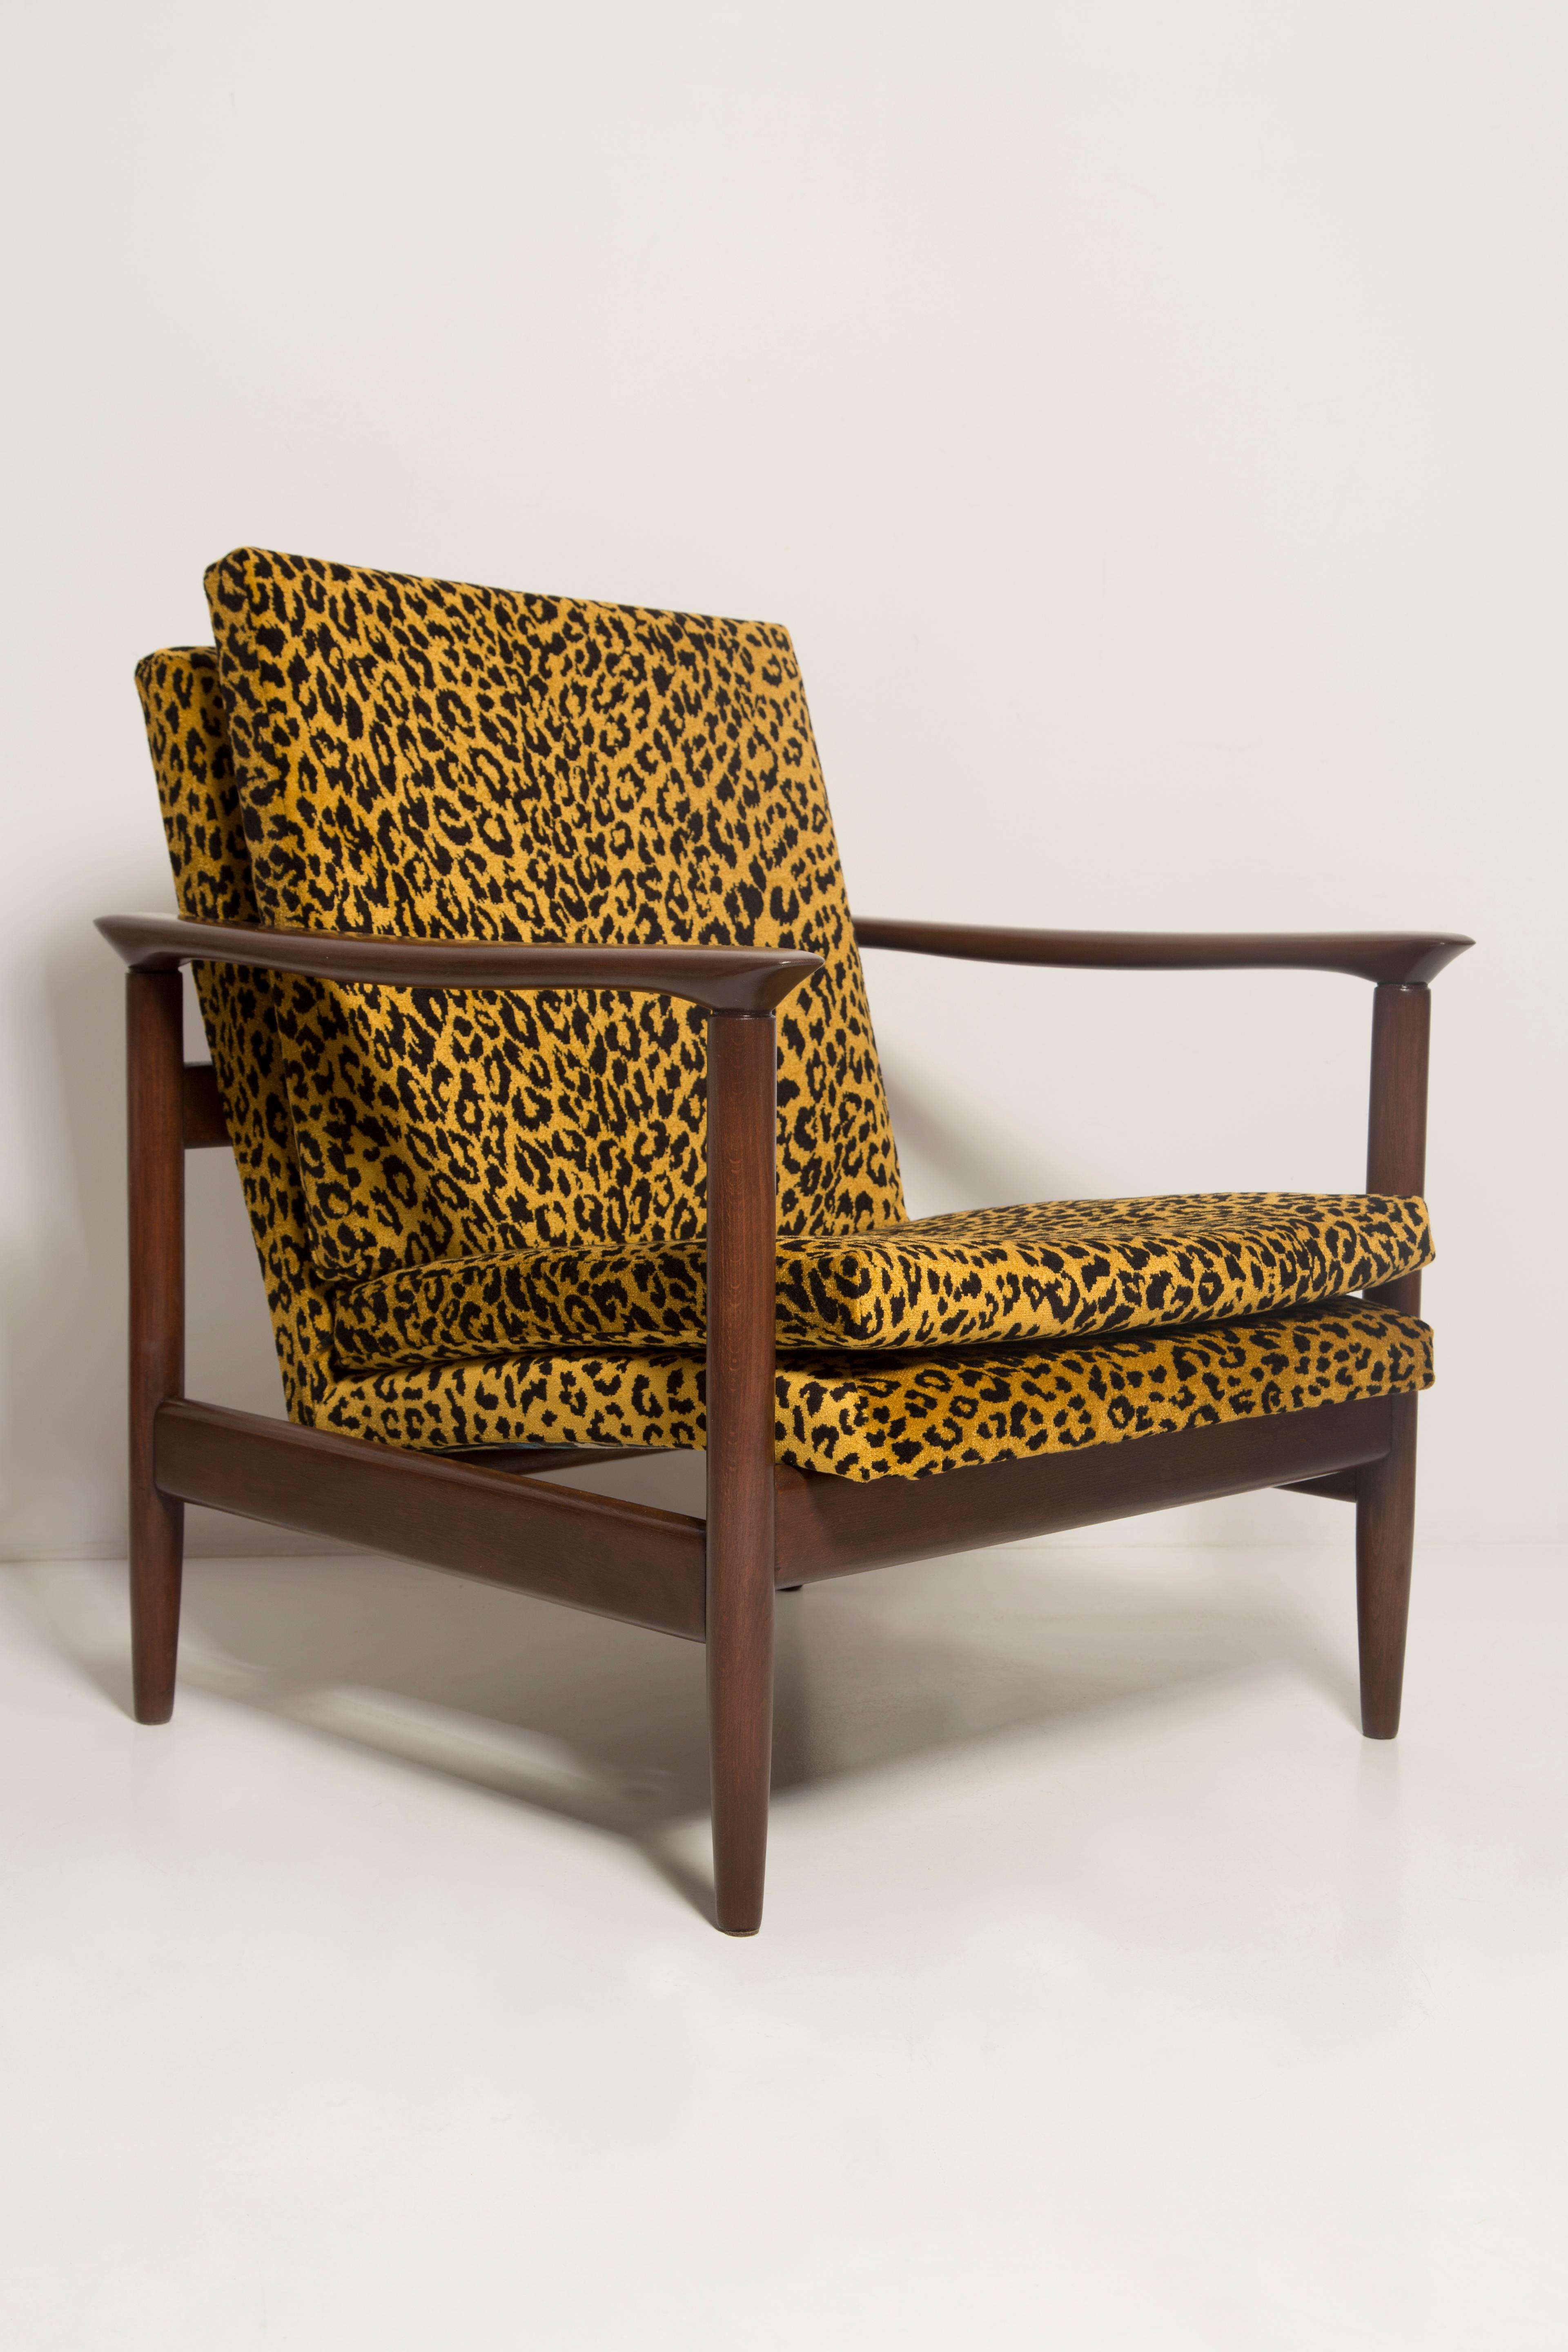 Fabric Pair of Midcentury Leopard Armchairs, GFM 142, Edmund Homa, Europe, 1960s For Sale